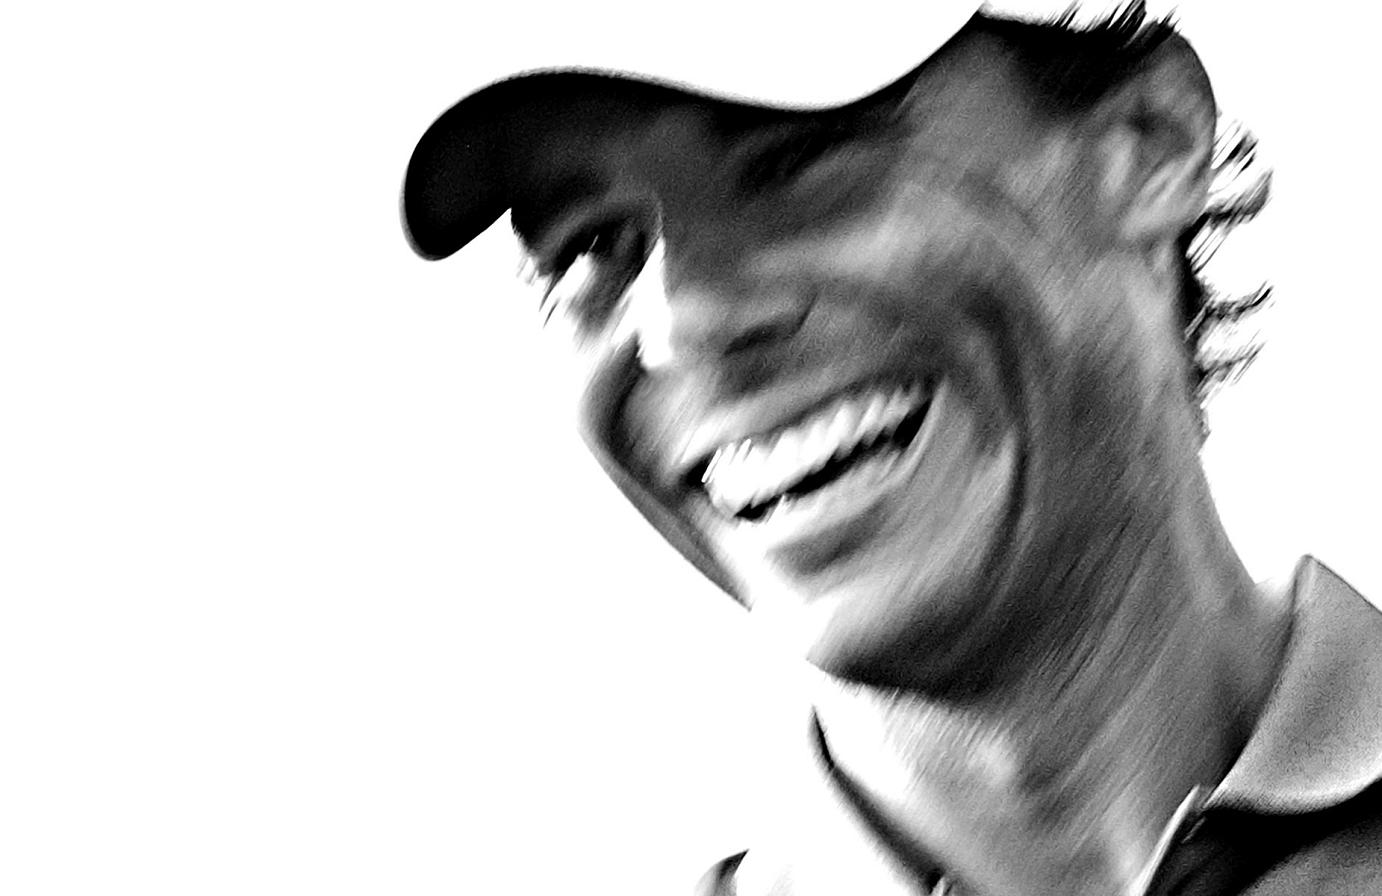 CoqCreative power by ProductionLink s.r.l. Rafael-Nadal Rafael-Nadal  Rafael-Nadal